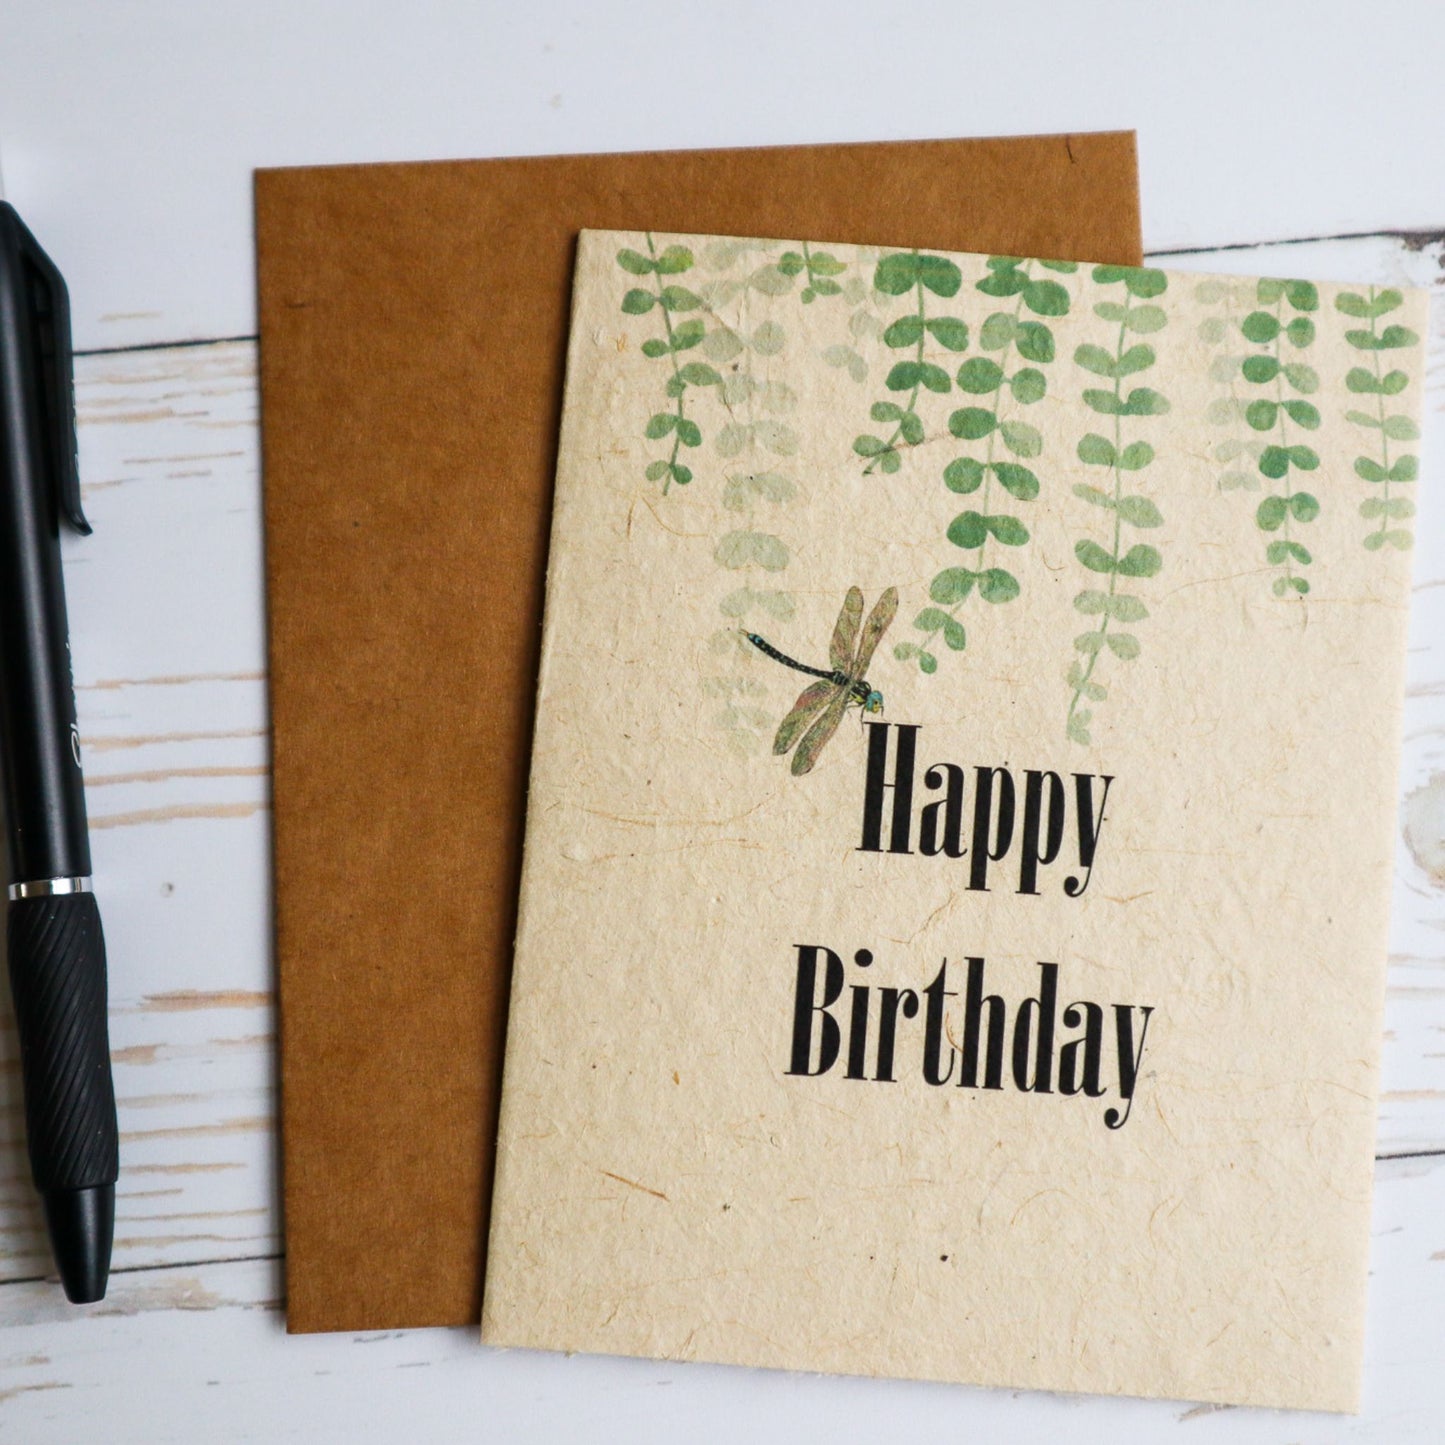 Plantable seed paper birthday card with dragonfly and greenery. Writing pen beside card.